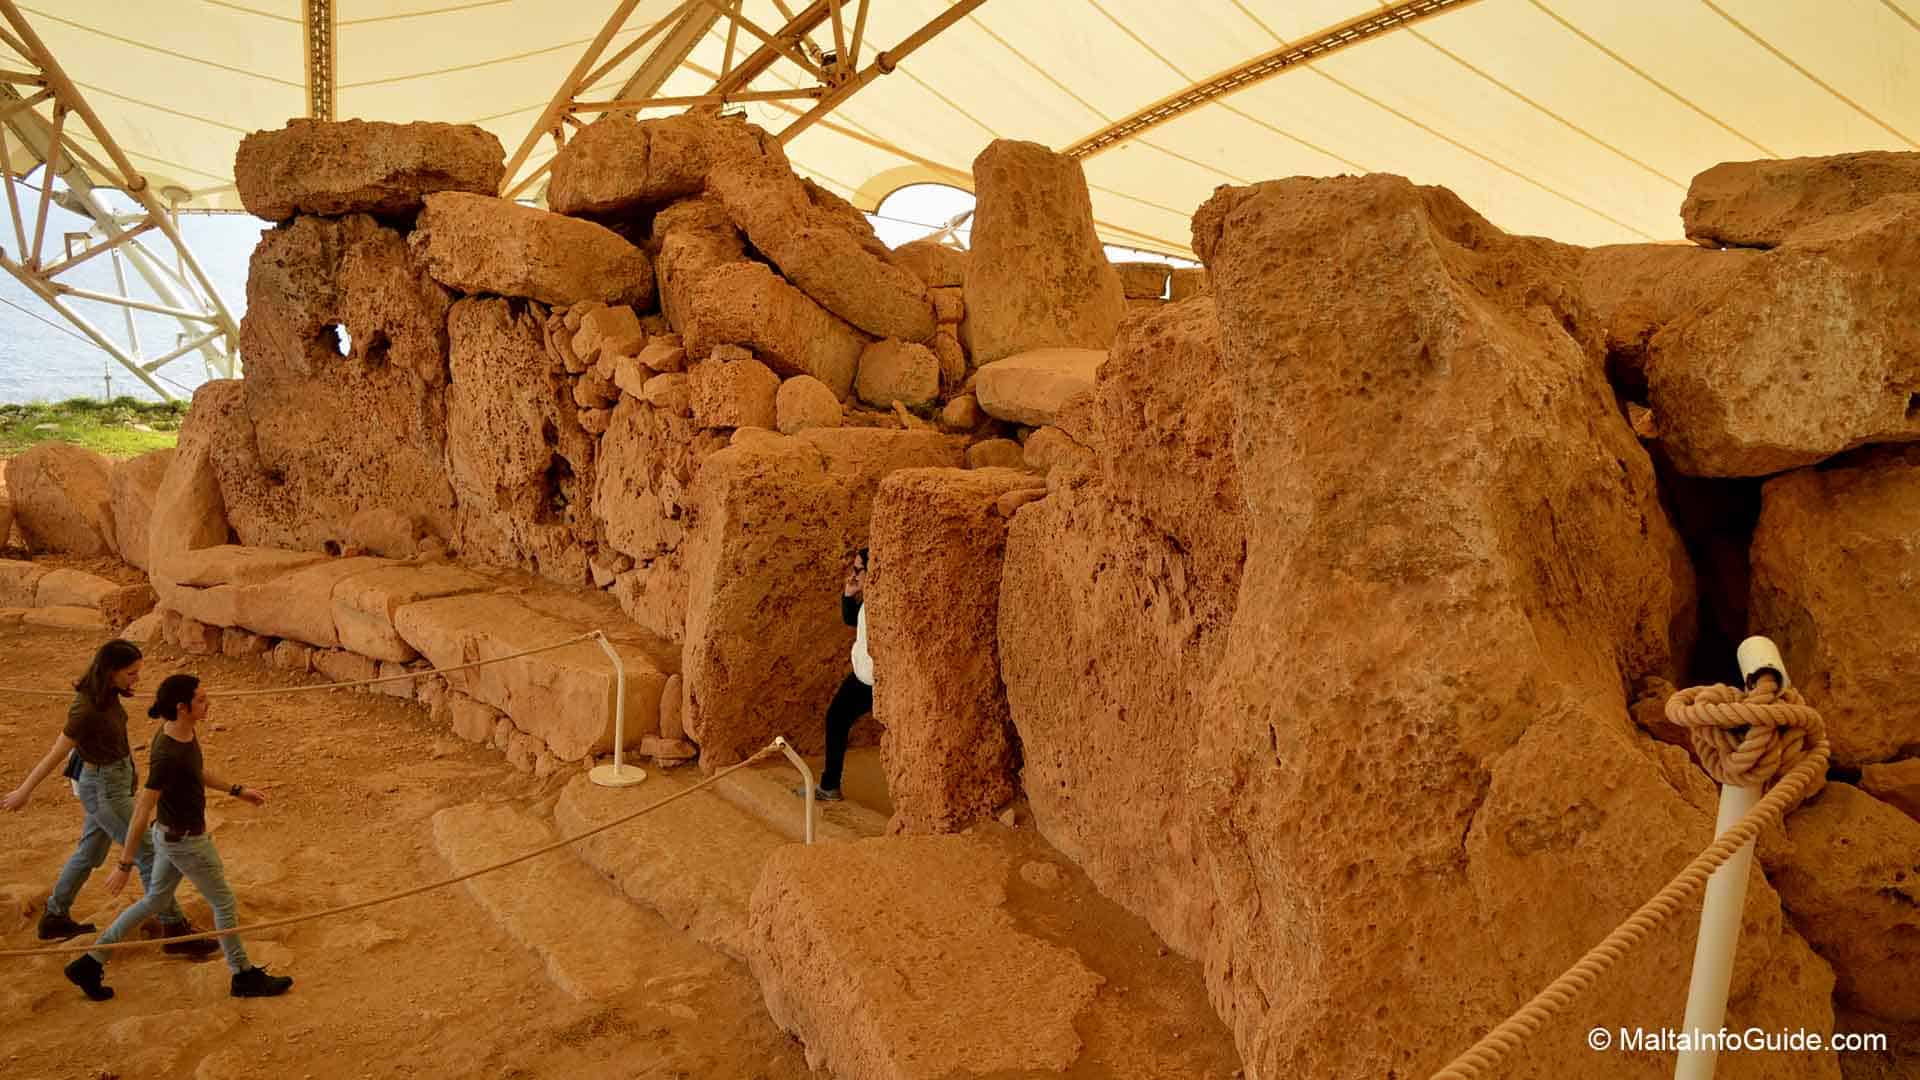 People walking in the Mnajdra temples.